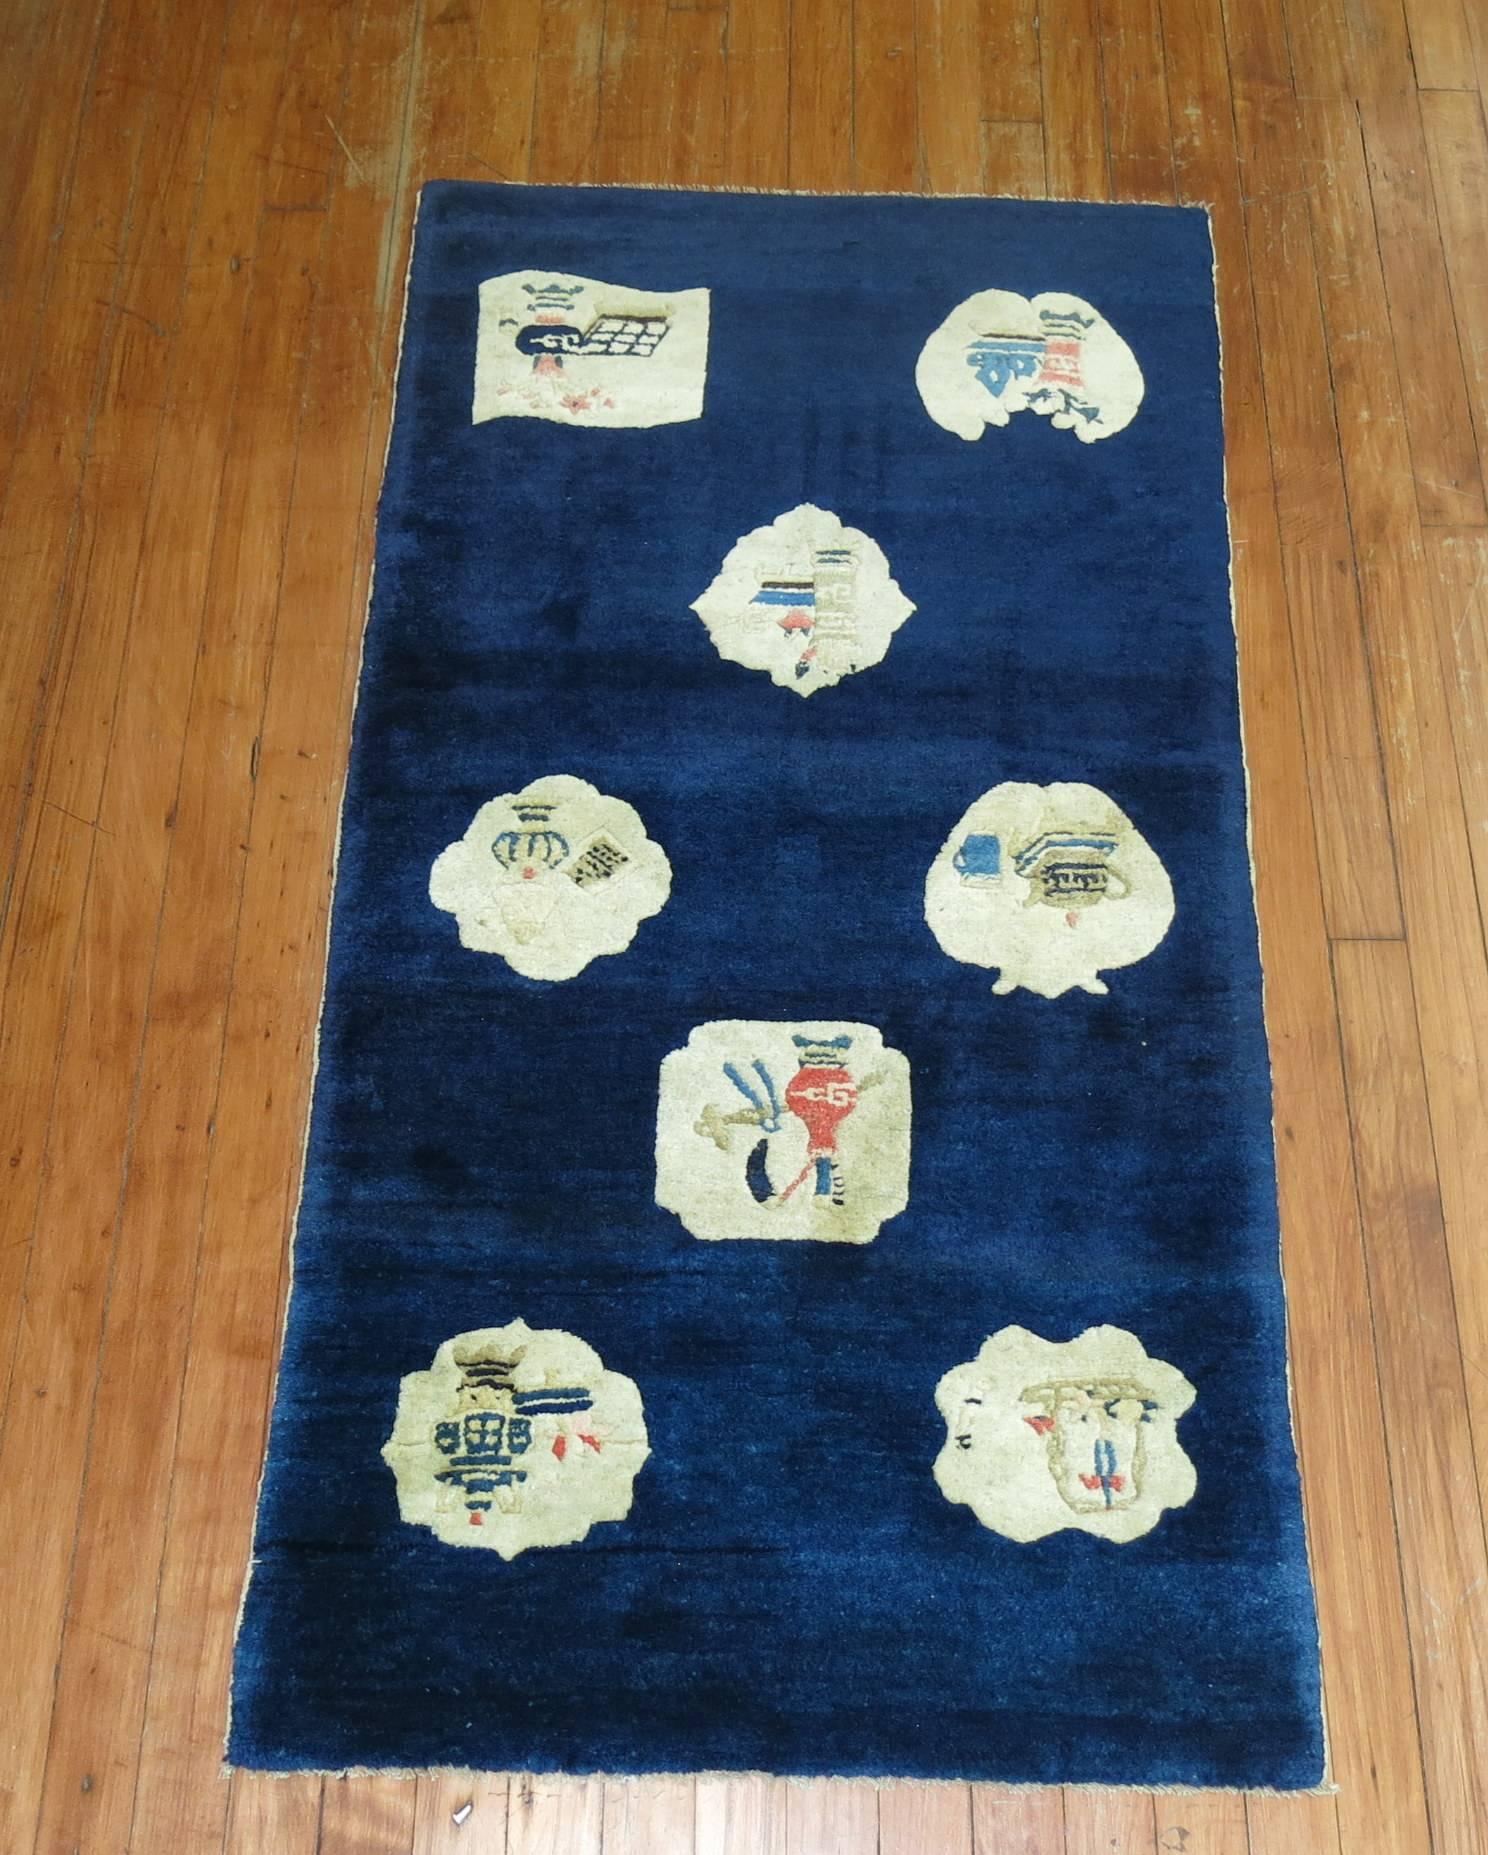 A folksy early 20th century Chinese Peking rug featuring eight irregular shaped elemental motifs on a midnight blue colored ground,

circa 1930. Measures: 2'3